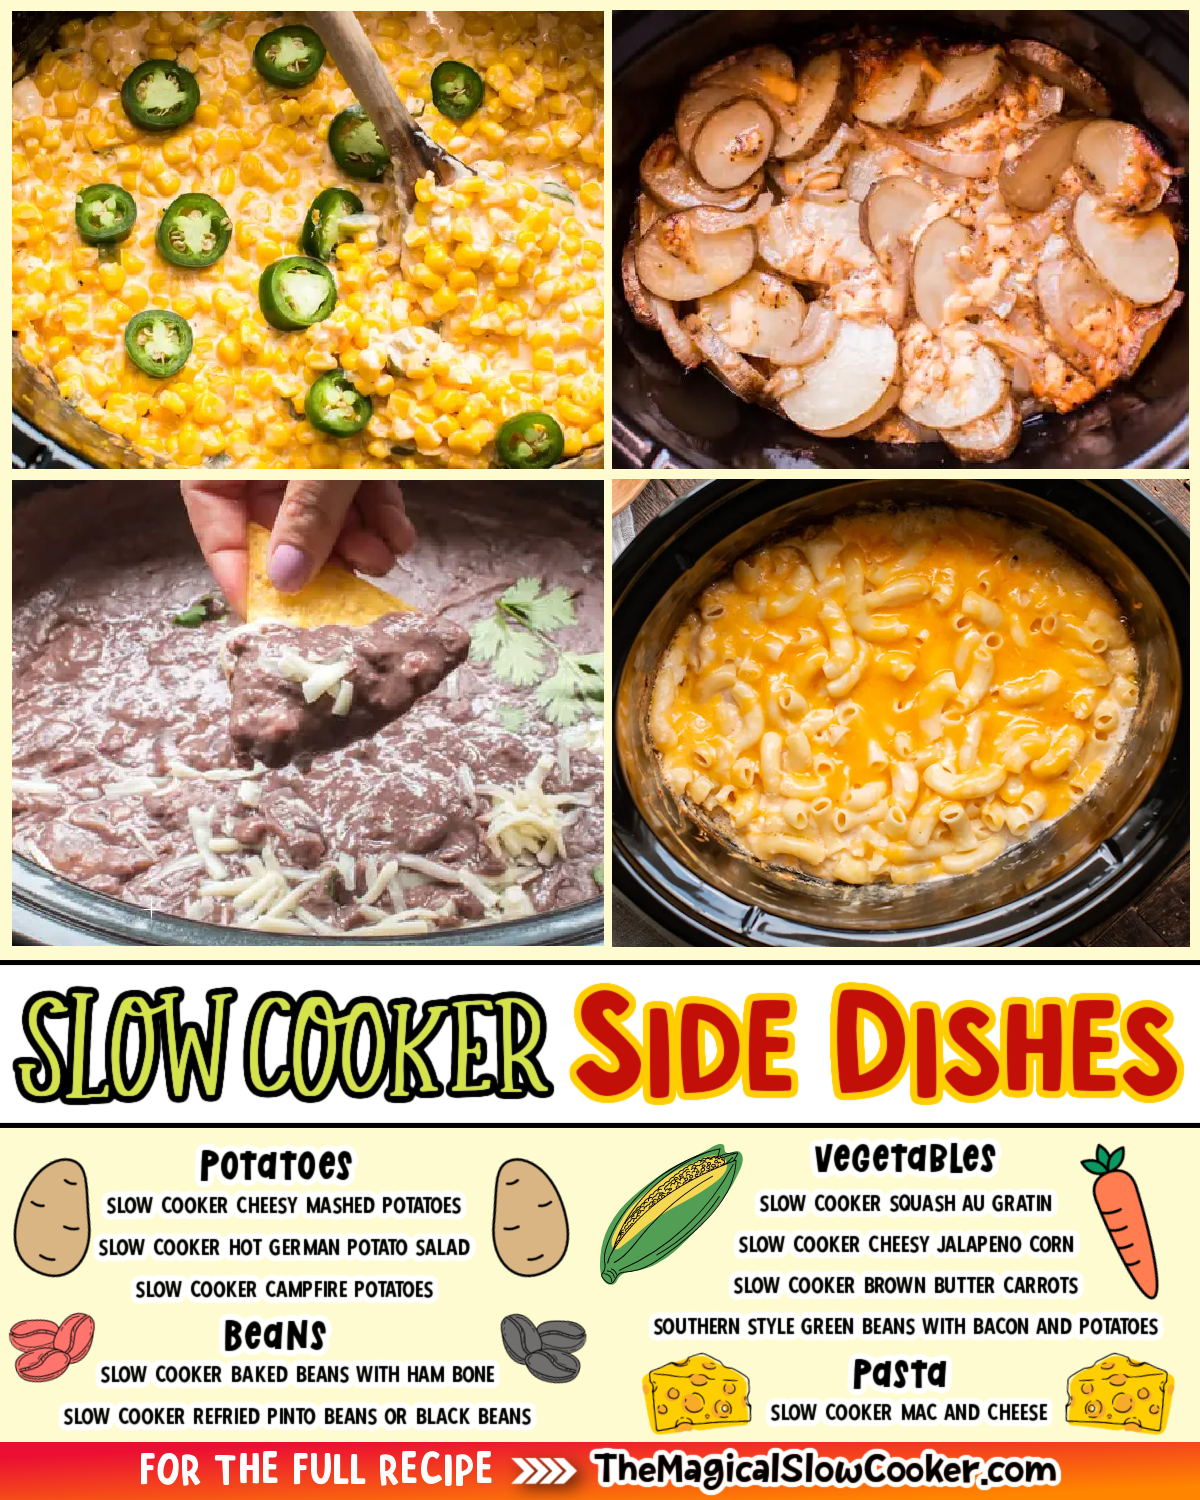 Slow Cooker side dish images with text overlay for facebook and pinterest.